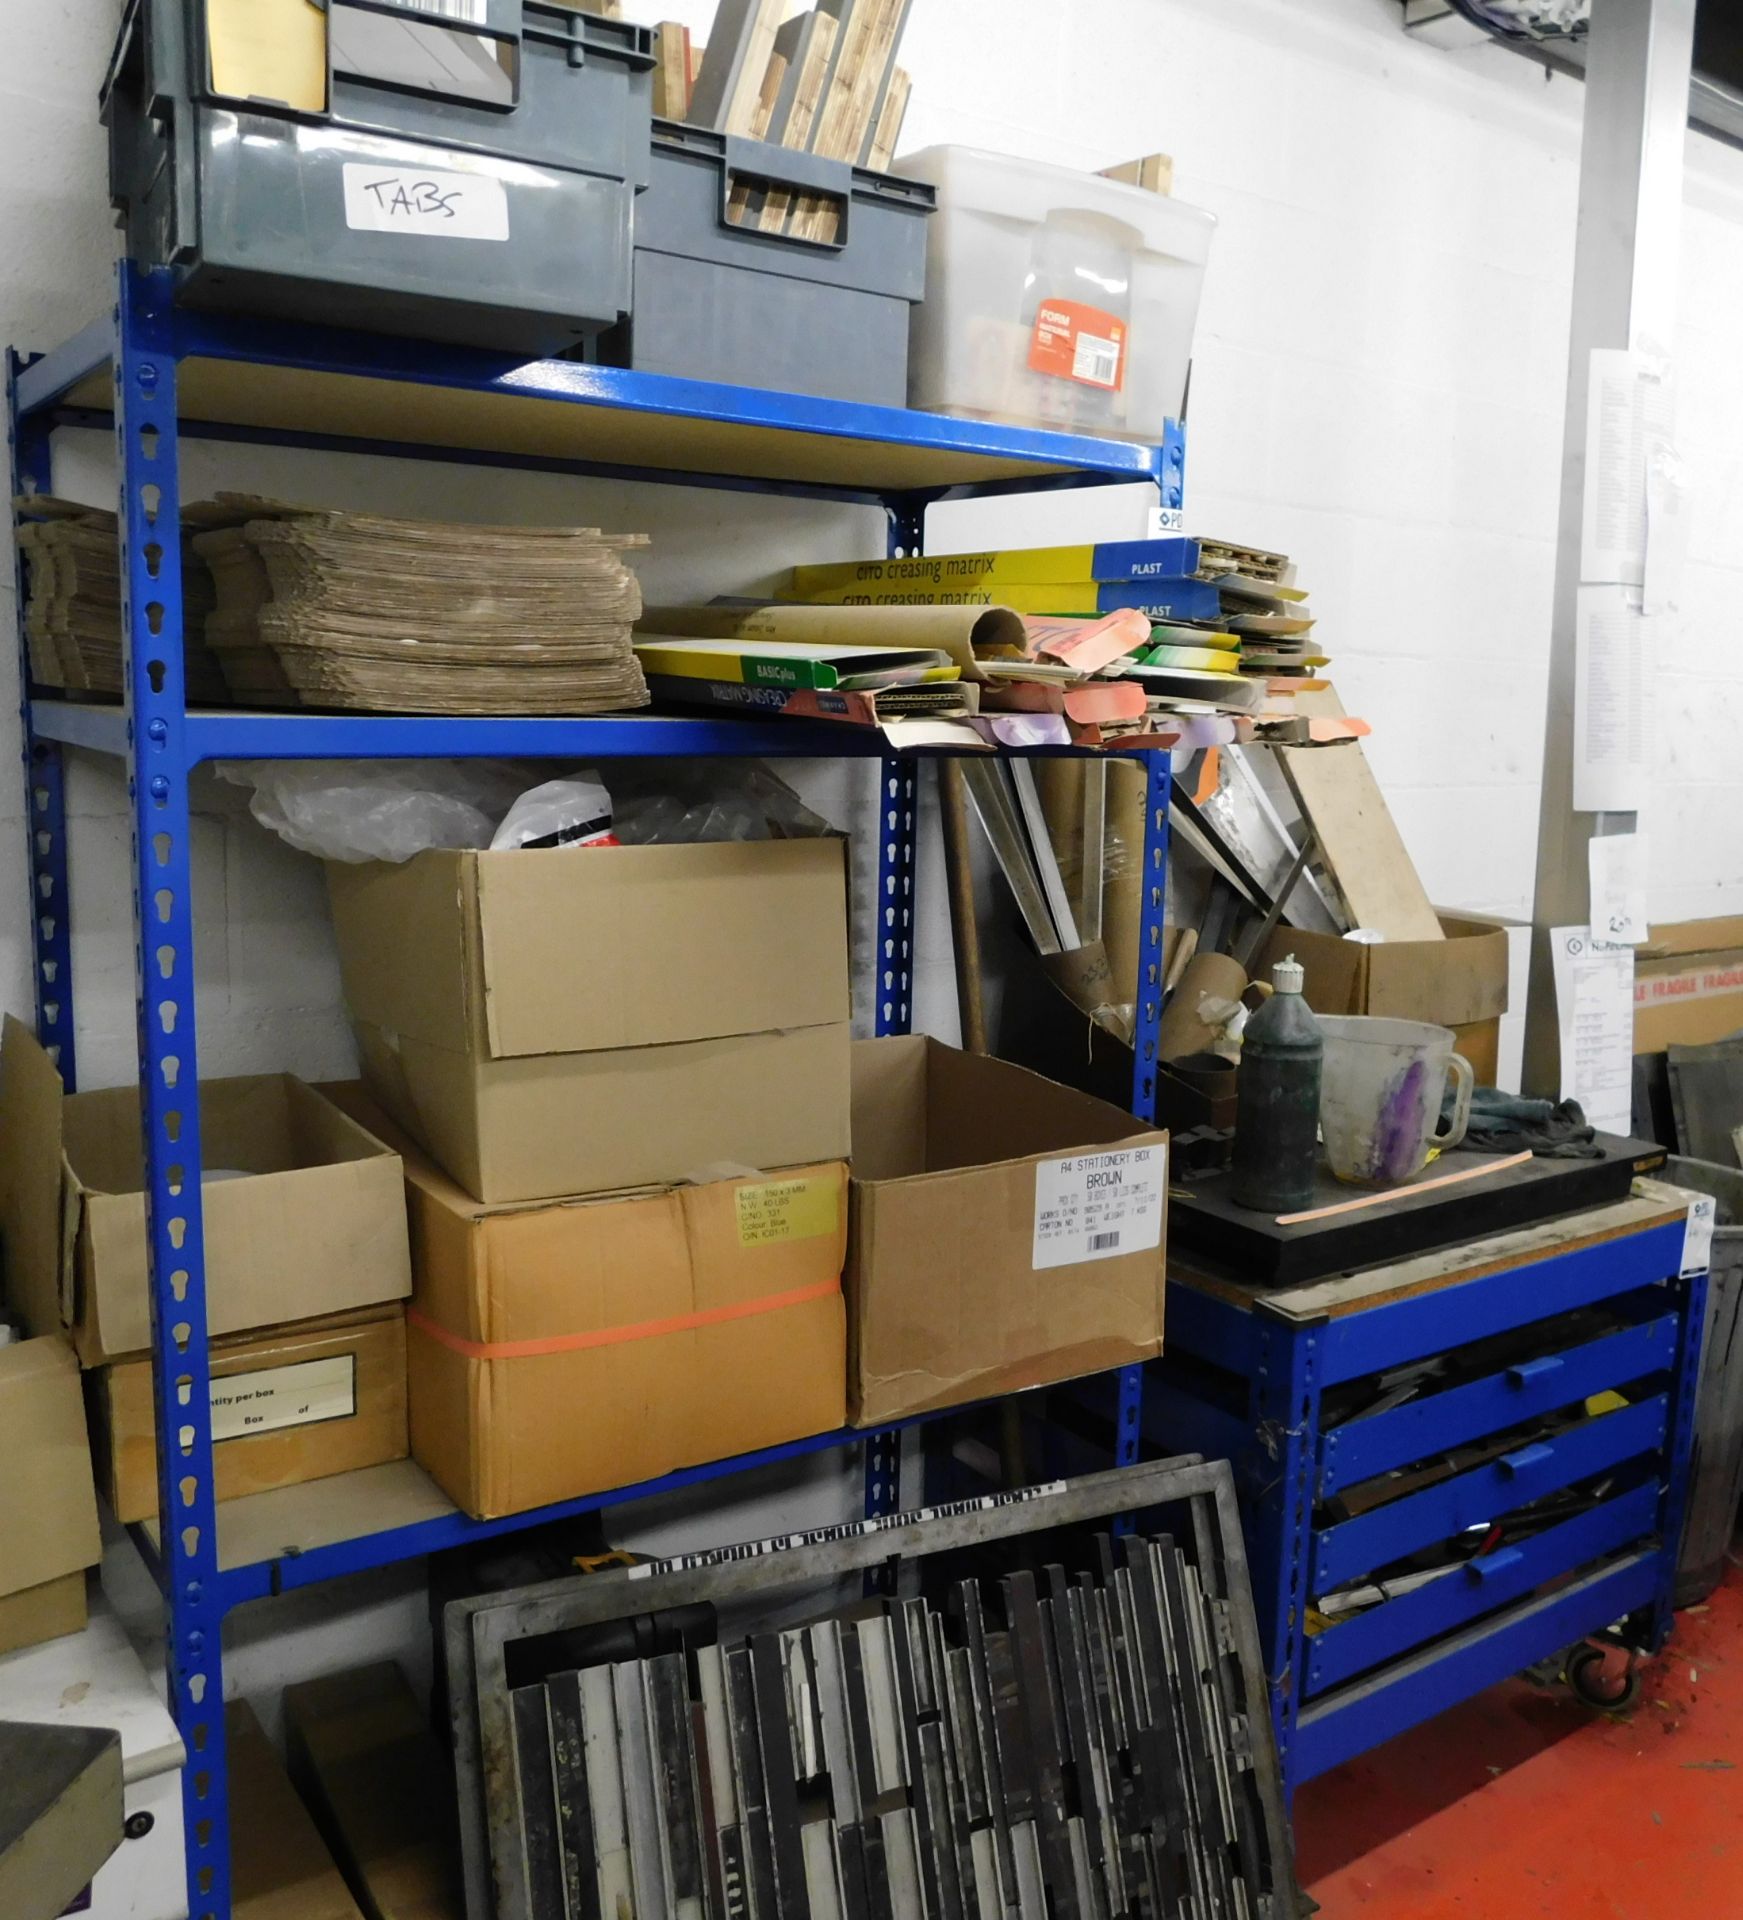 2 Lightweight Metal Shelving Units (Contents not Included) & Mobile Multi-Drawer Tool Storage & - Image 2 of 9